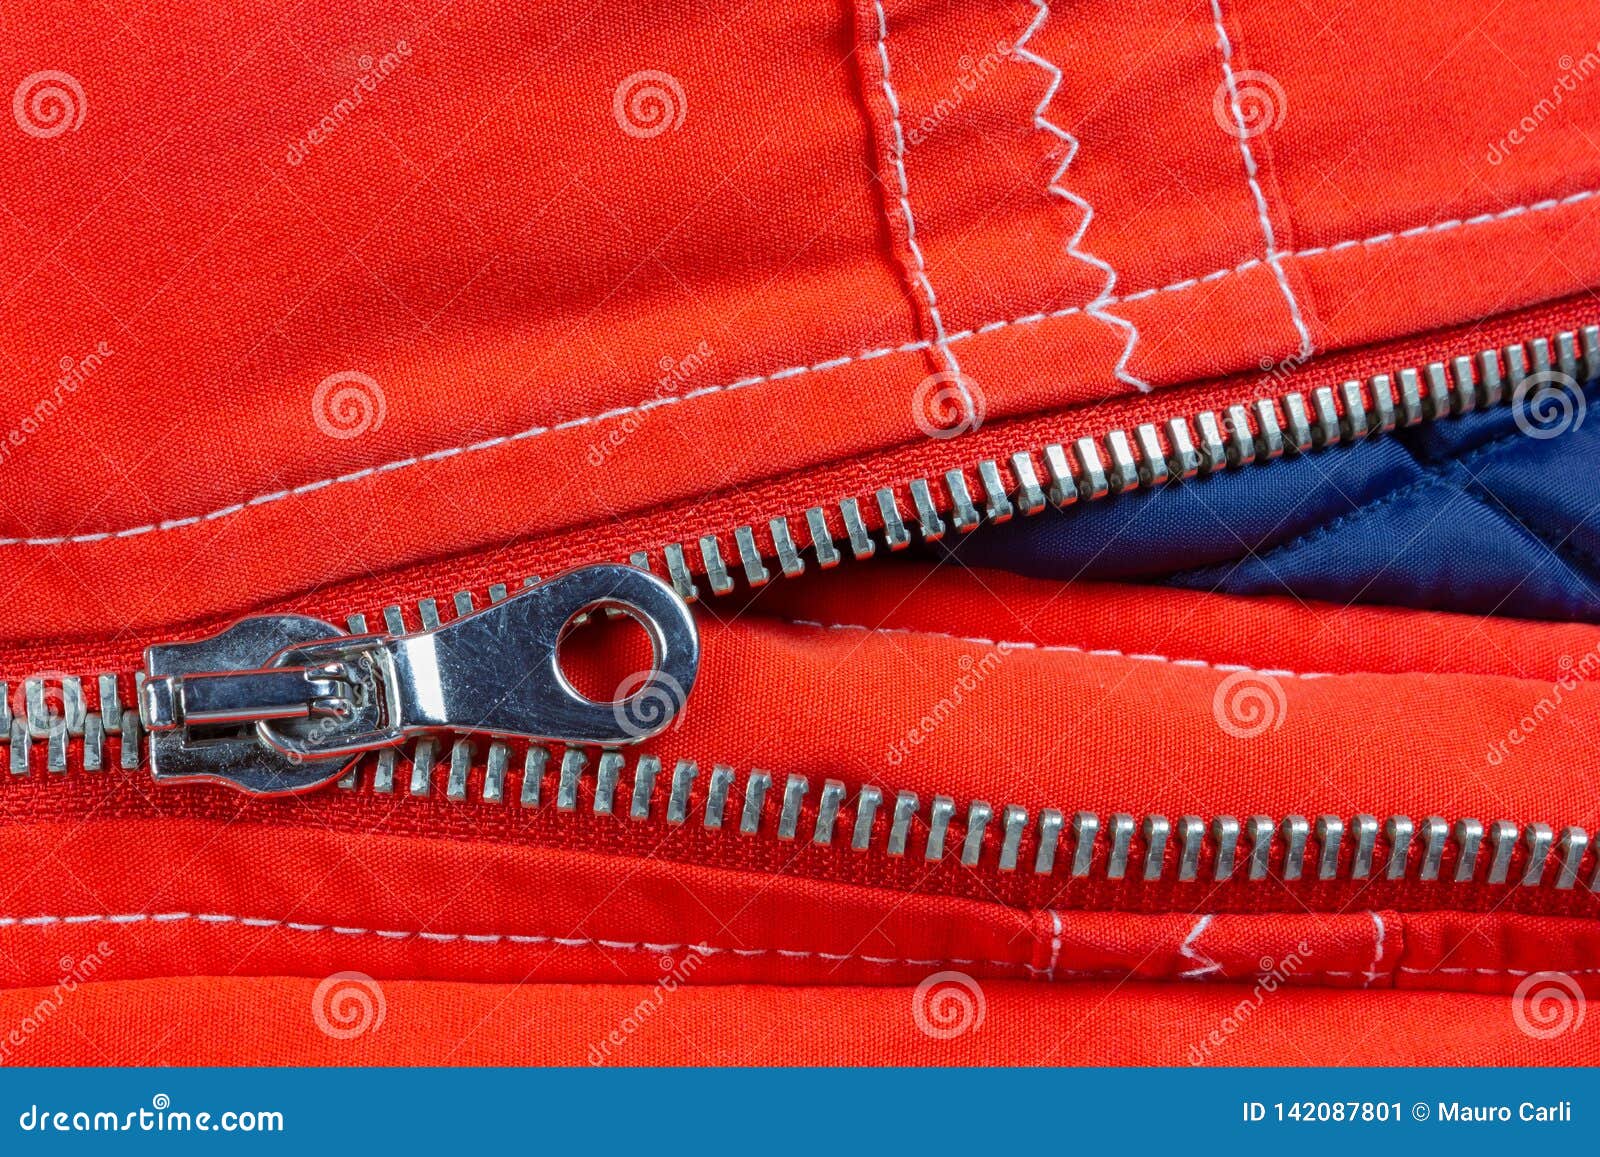 Zipper of a Red and Blue Down Jacket Stock Image - Image of tooth ...